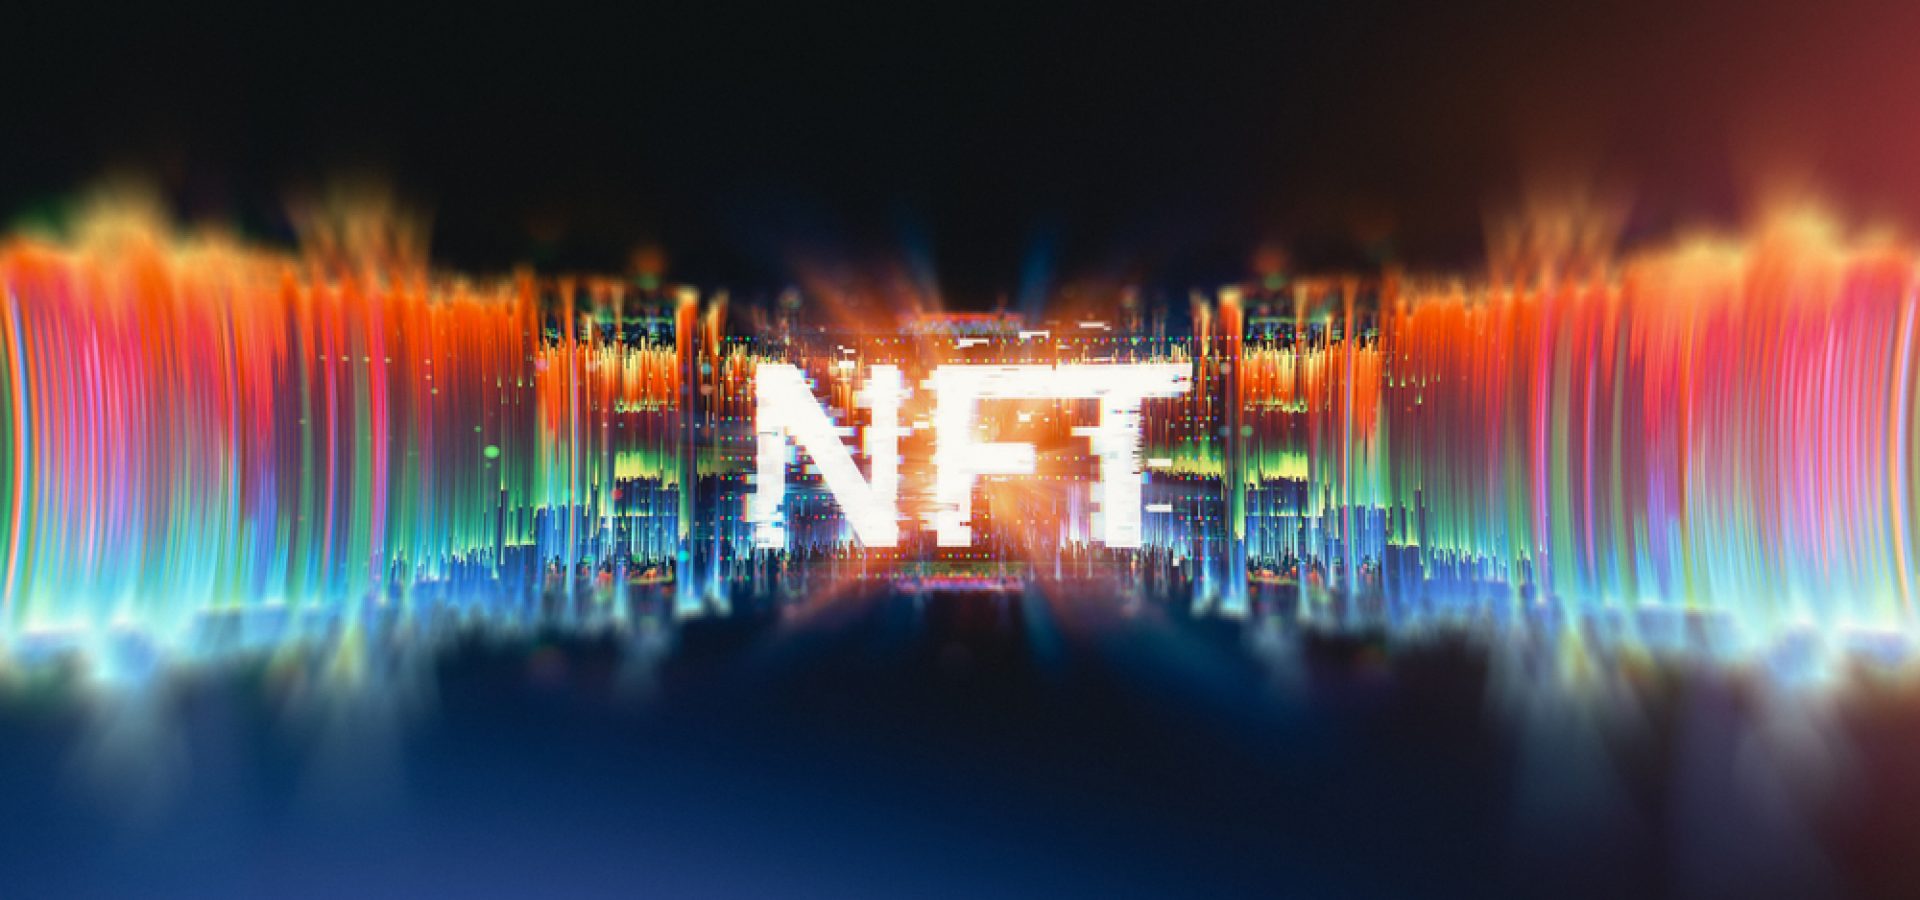 Best Marketplaces for Buying Non-Fungible Tokens (NFTs)